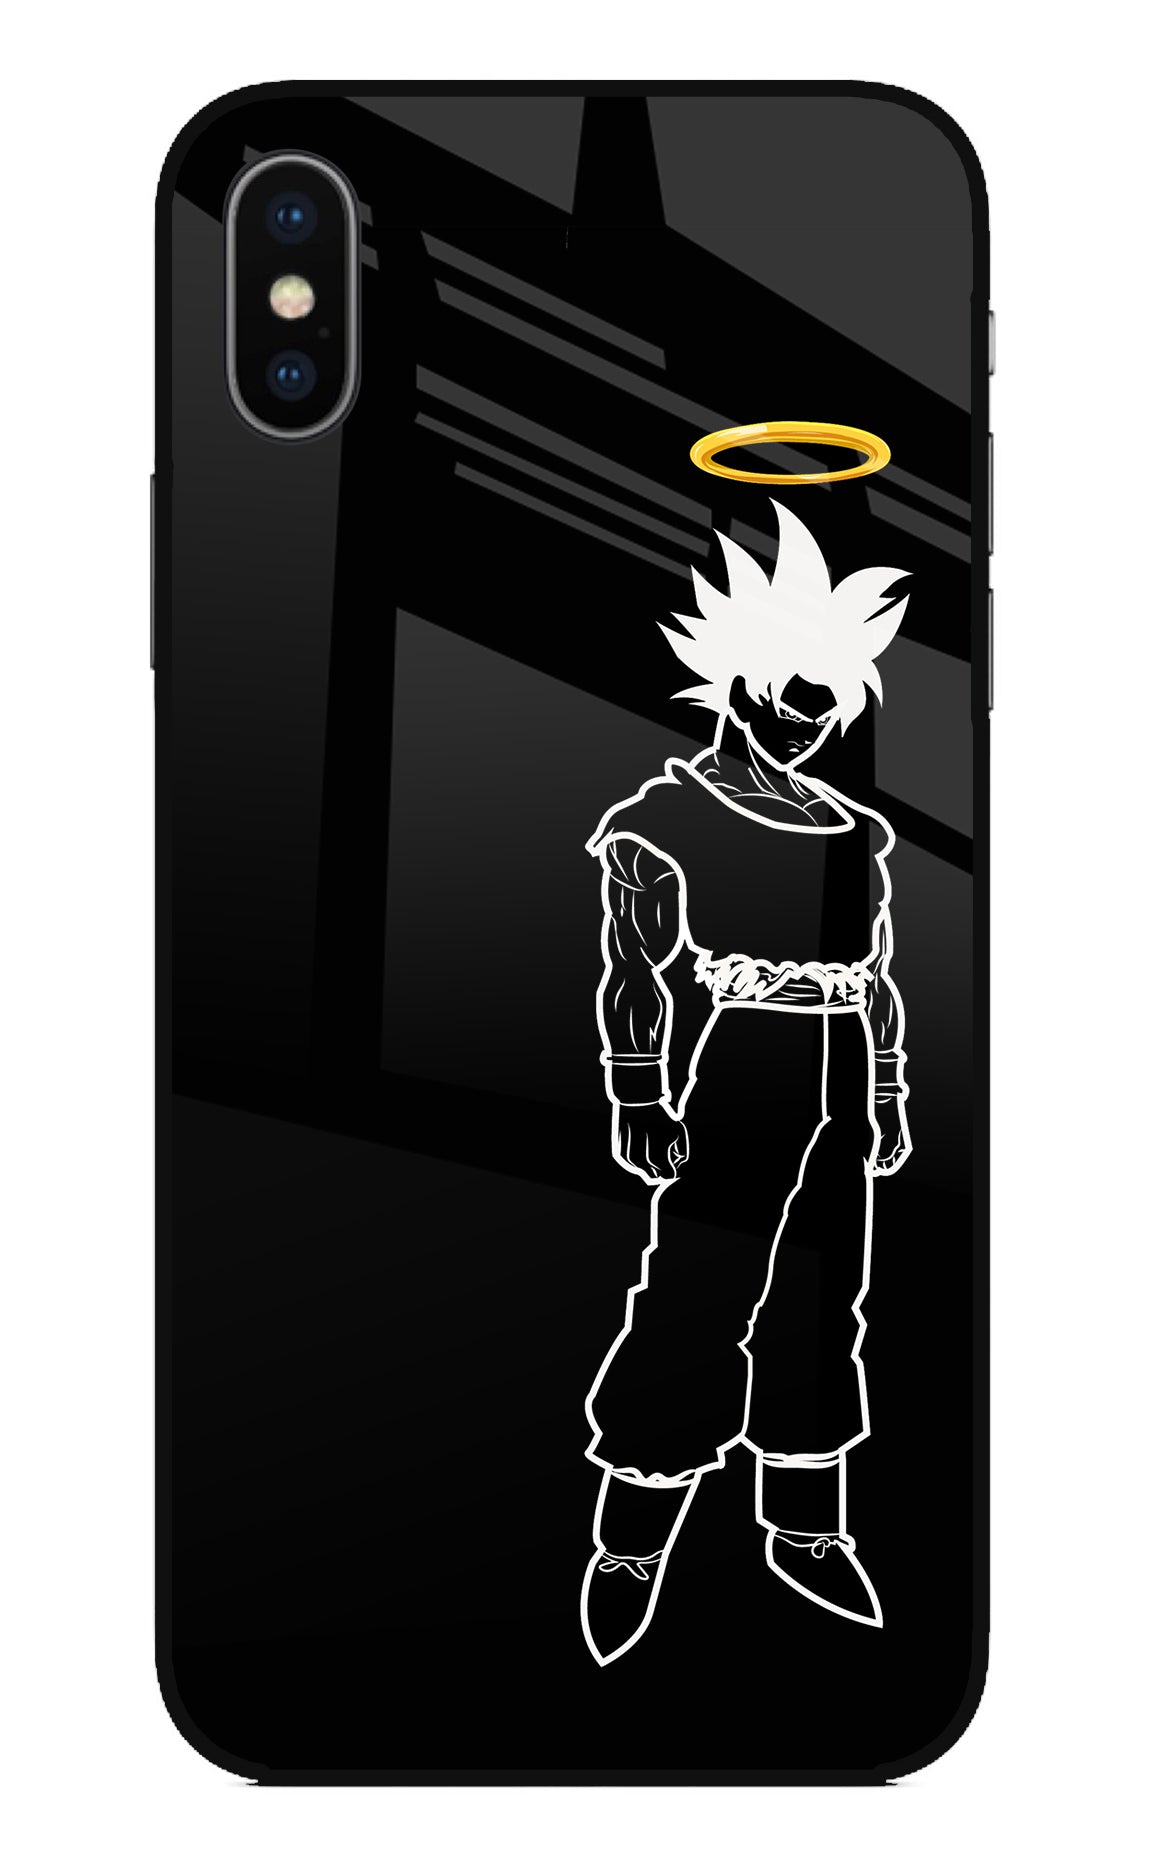 DBS Character iPhone X Back Cover